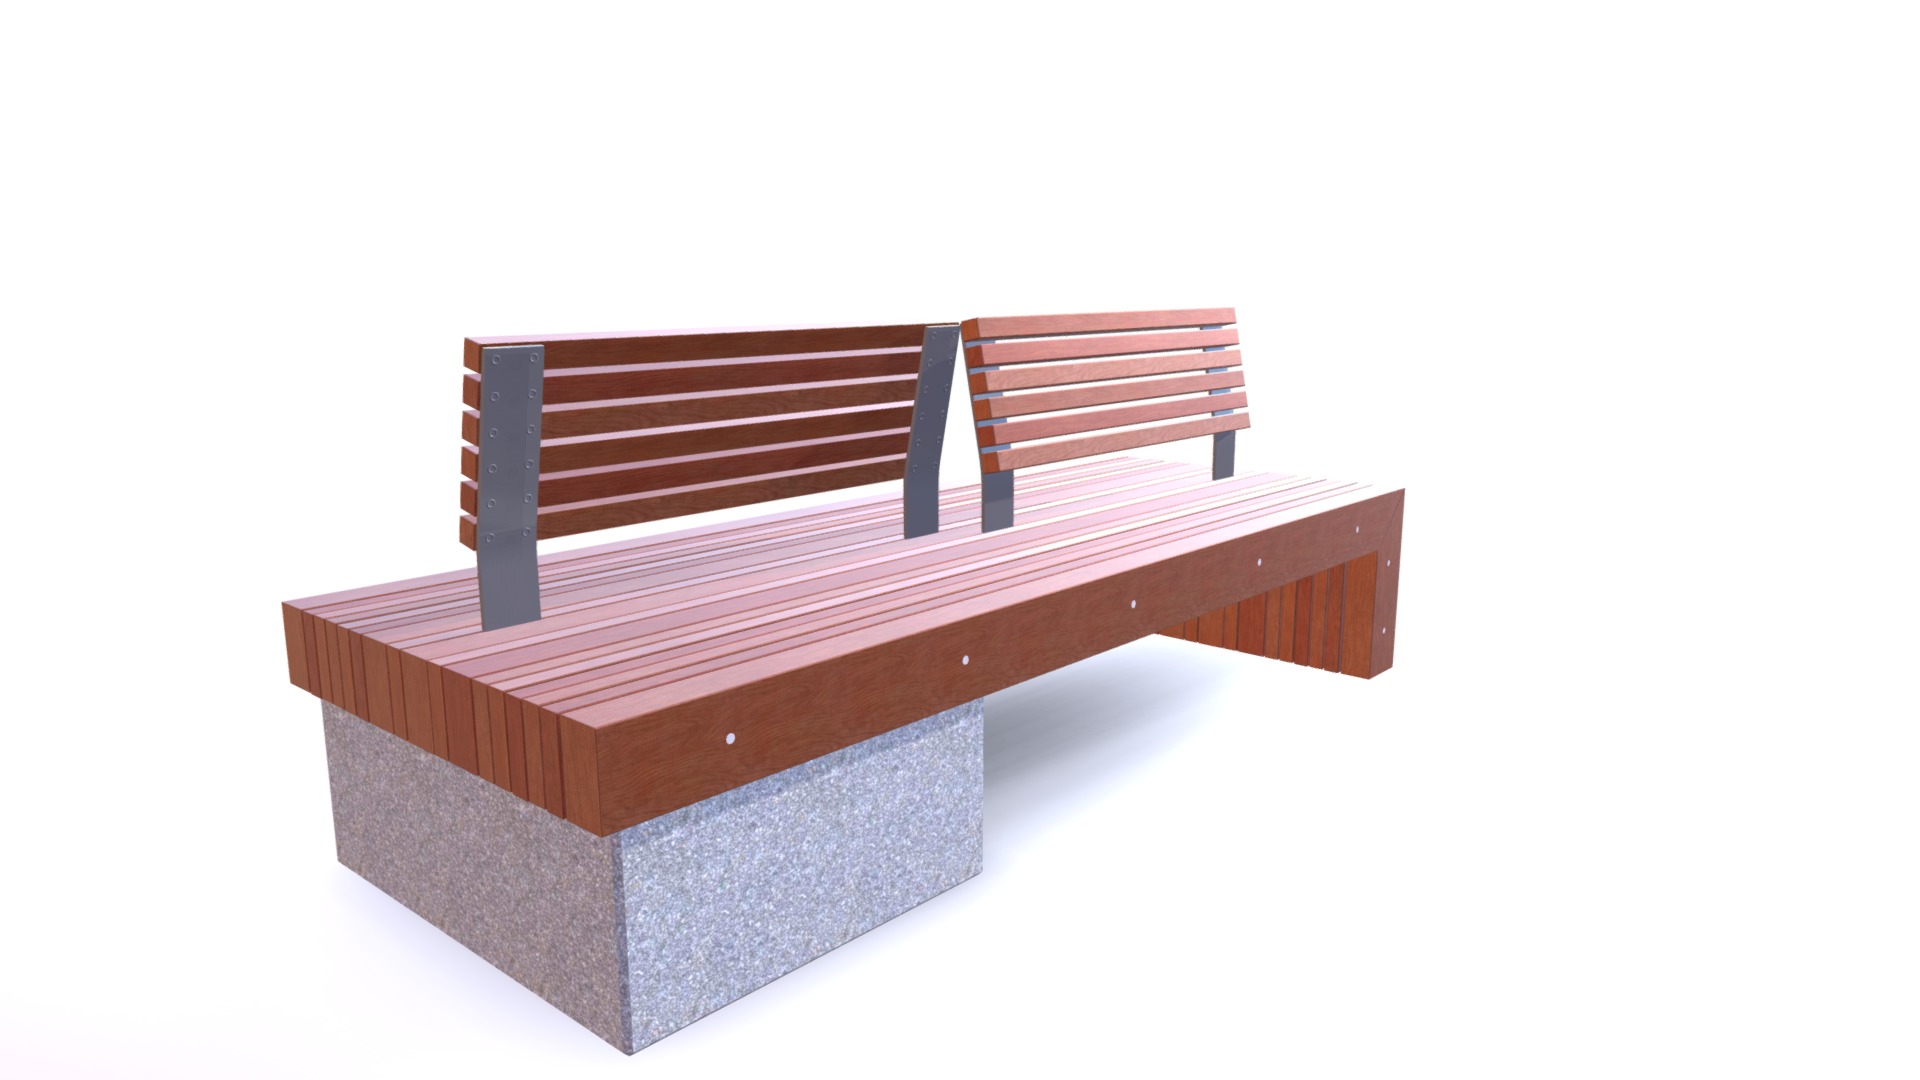 3D model Kolekcija 3-1 - This is a 3D model of the Kolekcija 3-1. The 3D model is about a wooden bench with a white background.